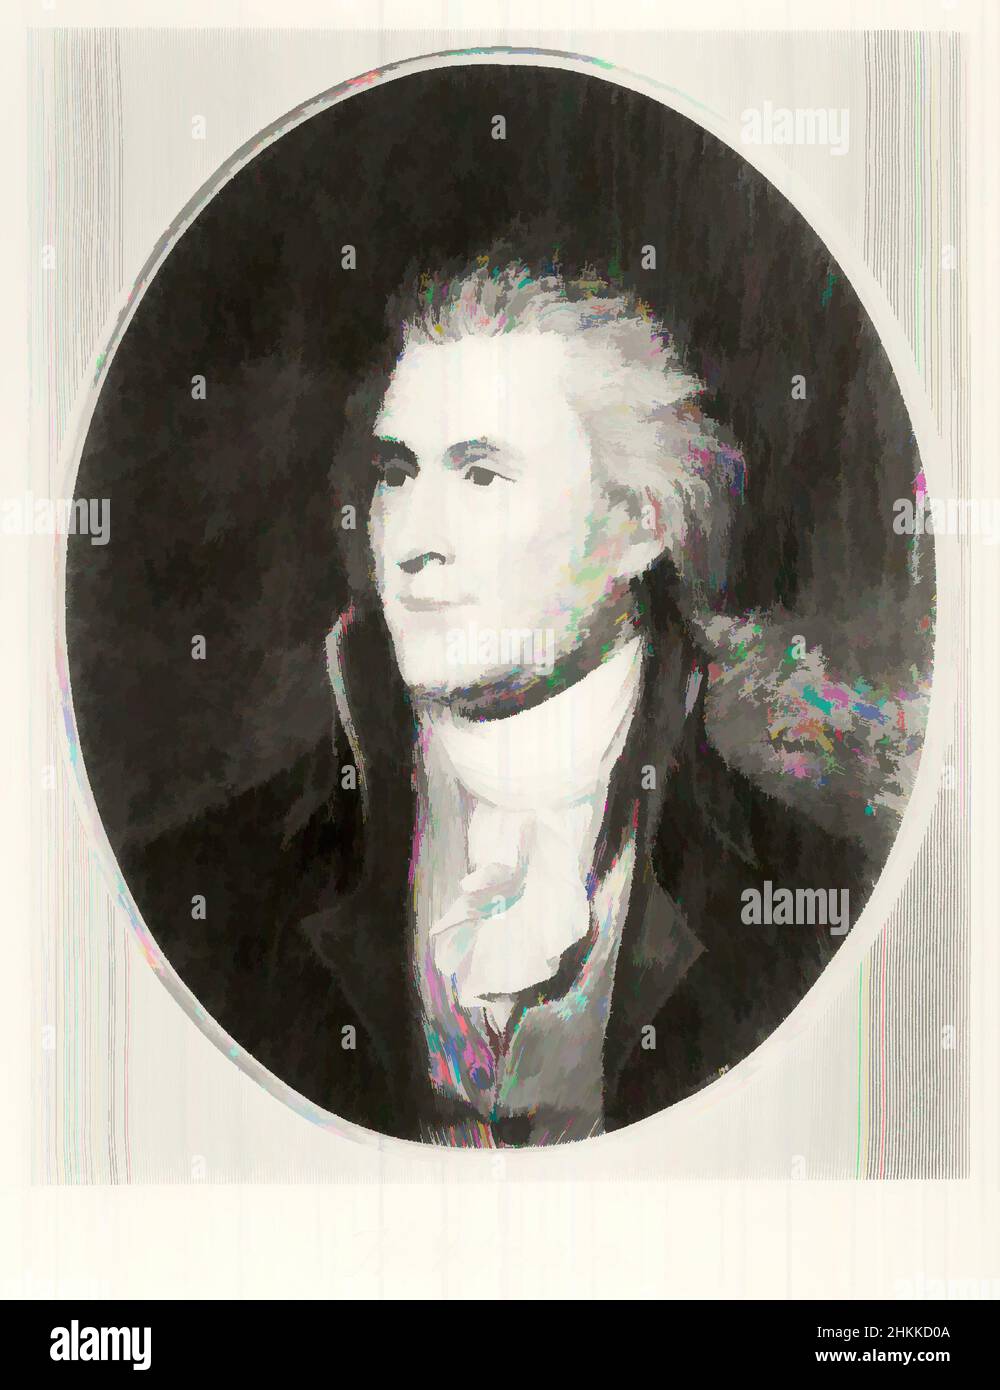 Art inspired by Thomas Jefferson, Wood engraving on fine tissue paper, 1901, 9 3/4 x 7 15/16 in., 24.8 x 20.2 cm, cravate, Founding Father, government, history, leader, ndd6, politician, President, statesman, United States, Classic works modernized by Artotop with a splash of modernity. Shapes, color and value, eye-catching visual impact on art. Emotions through freedom of artworks in a contemporary way. A timeless message pursuing a wildly creative new direction. Artists turning to the digital medium and creating the Artotop NFT Stock Photo